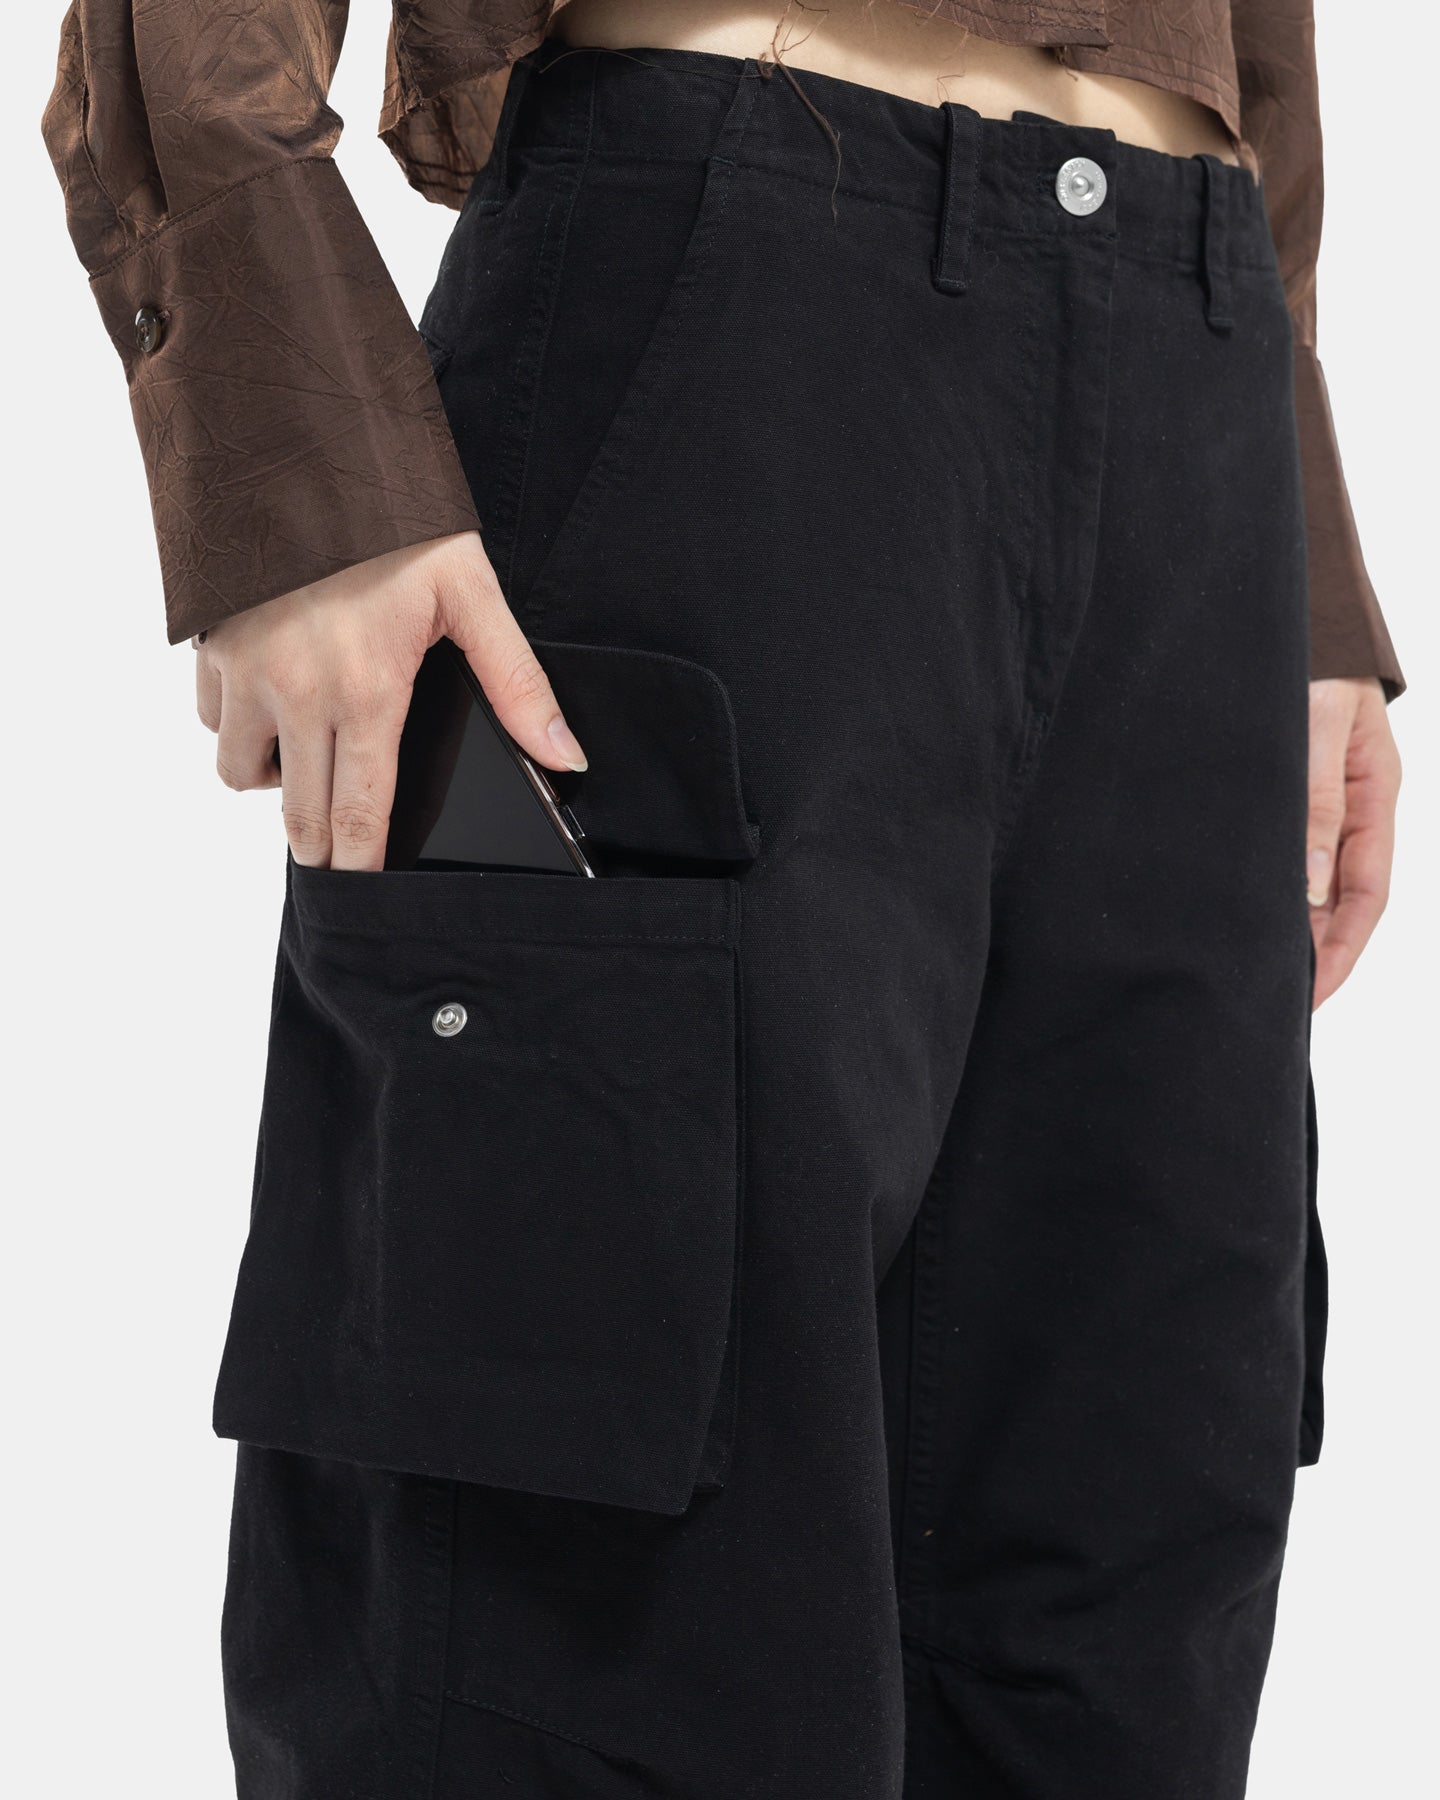 Black Cargo Pants from Our Legacy reaching into pocket on white background